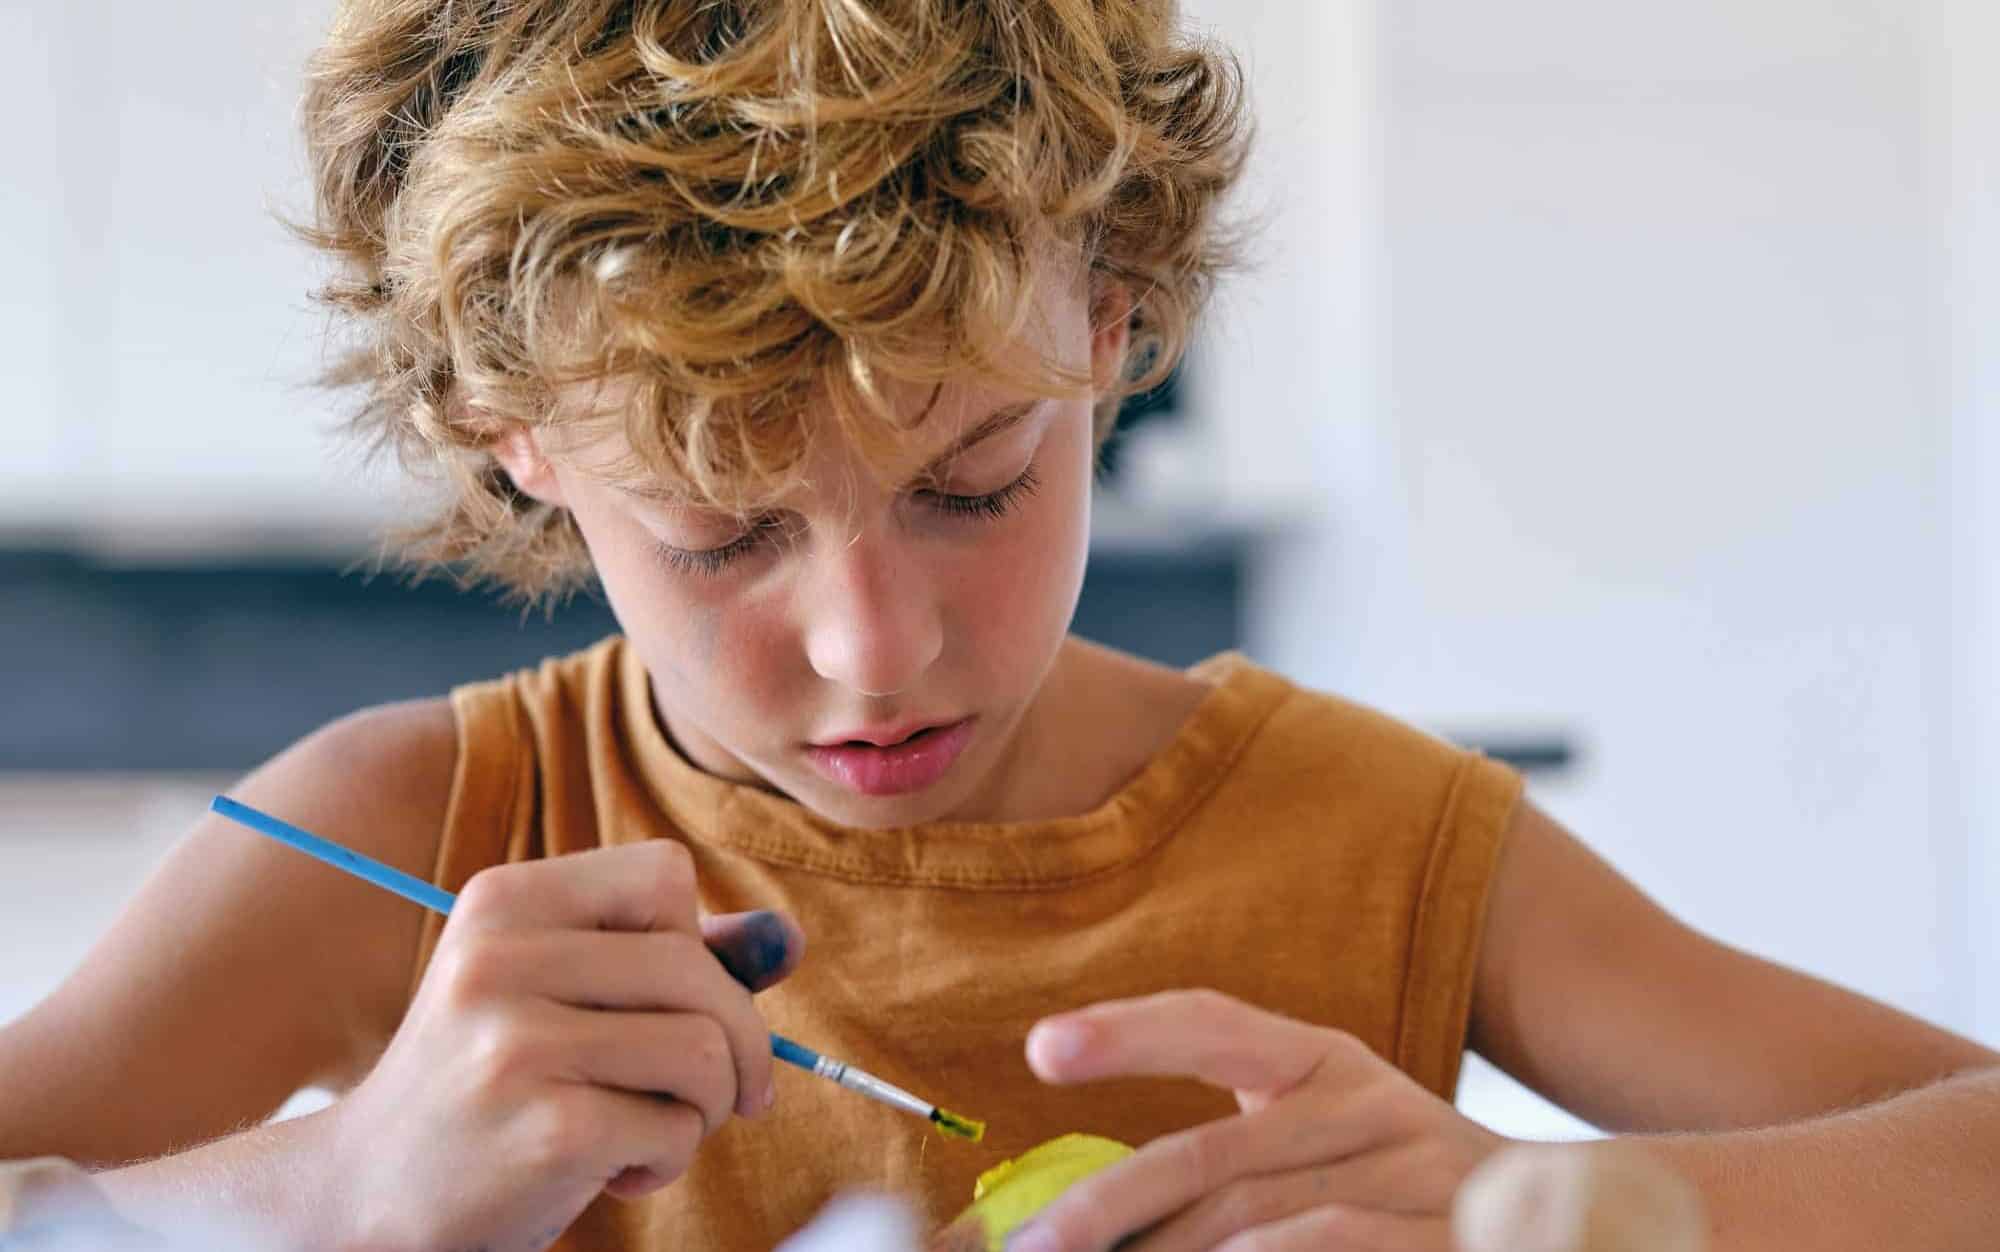 Focused child painting rock at home